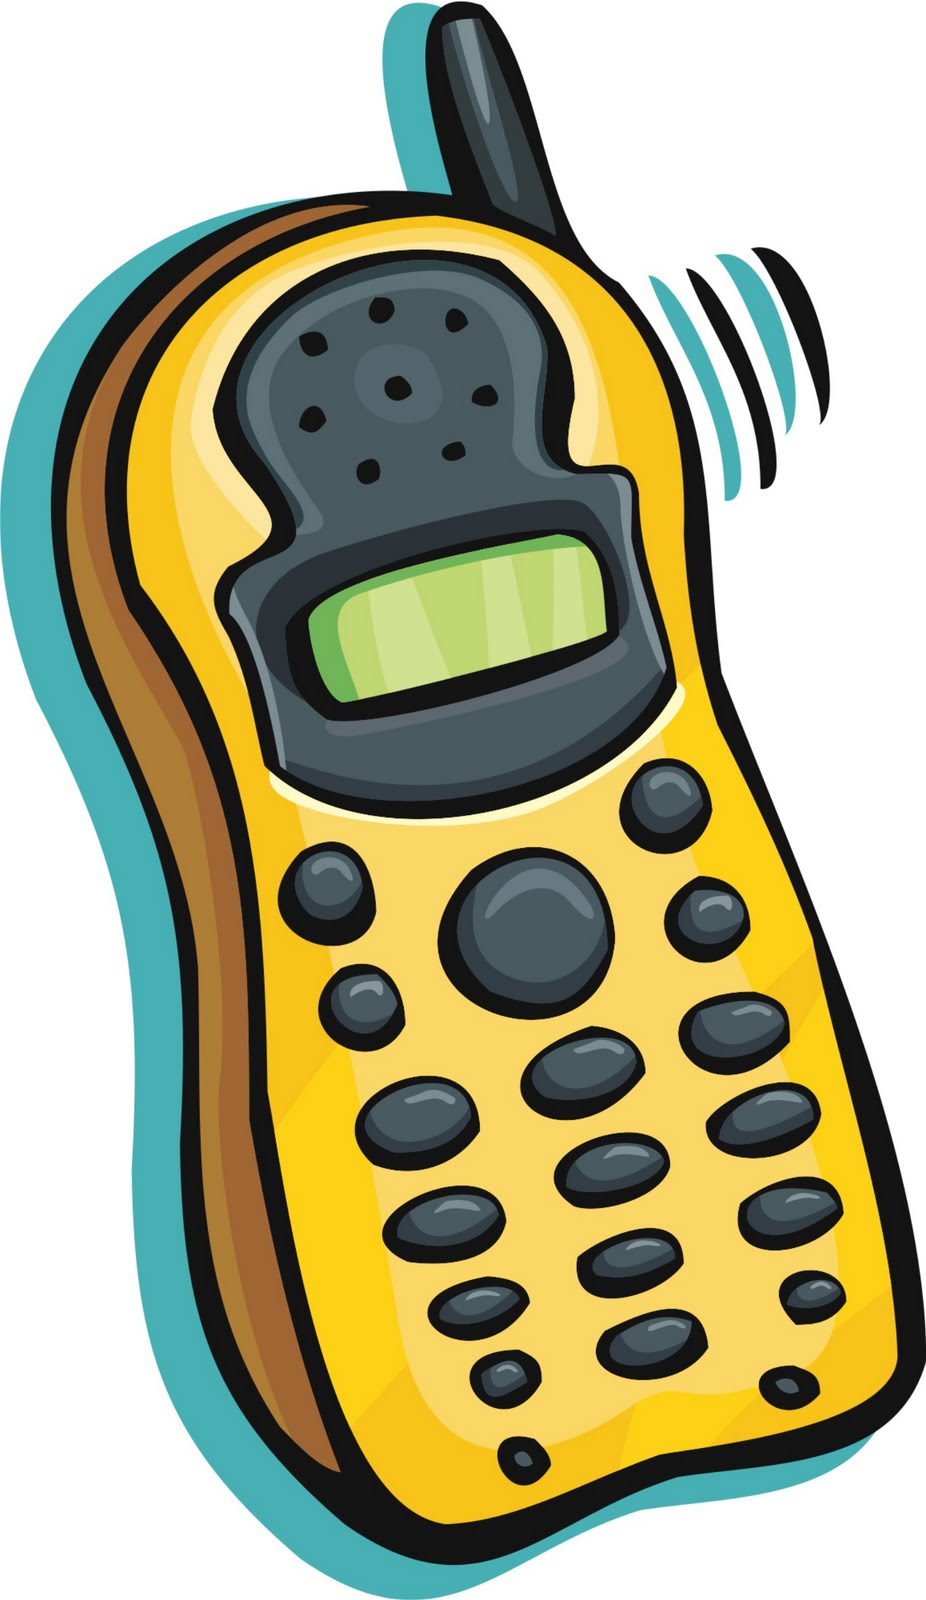 Phone clip art icon free clipart images - Cliparting.com